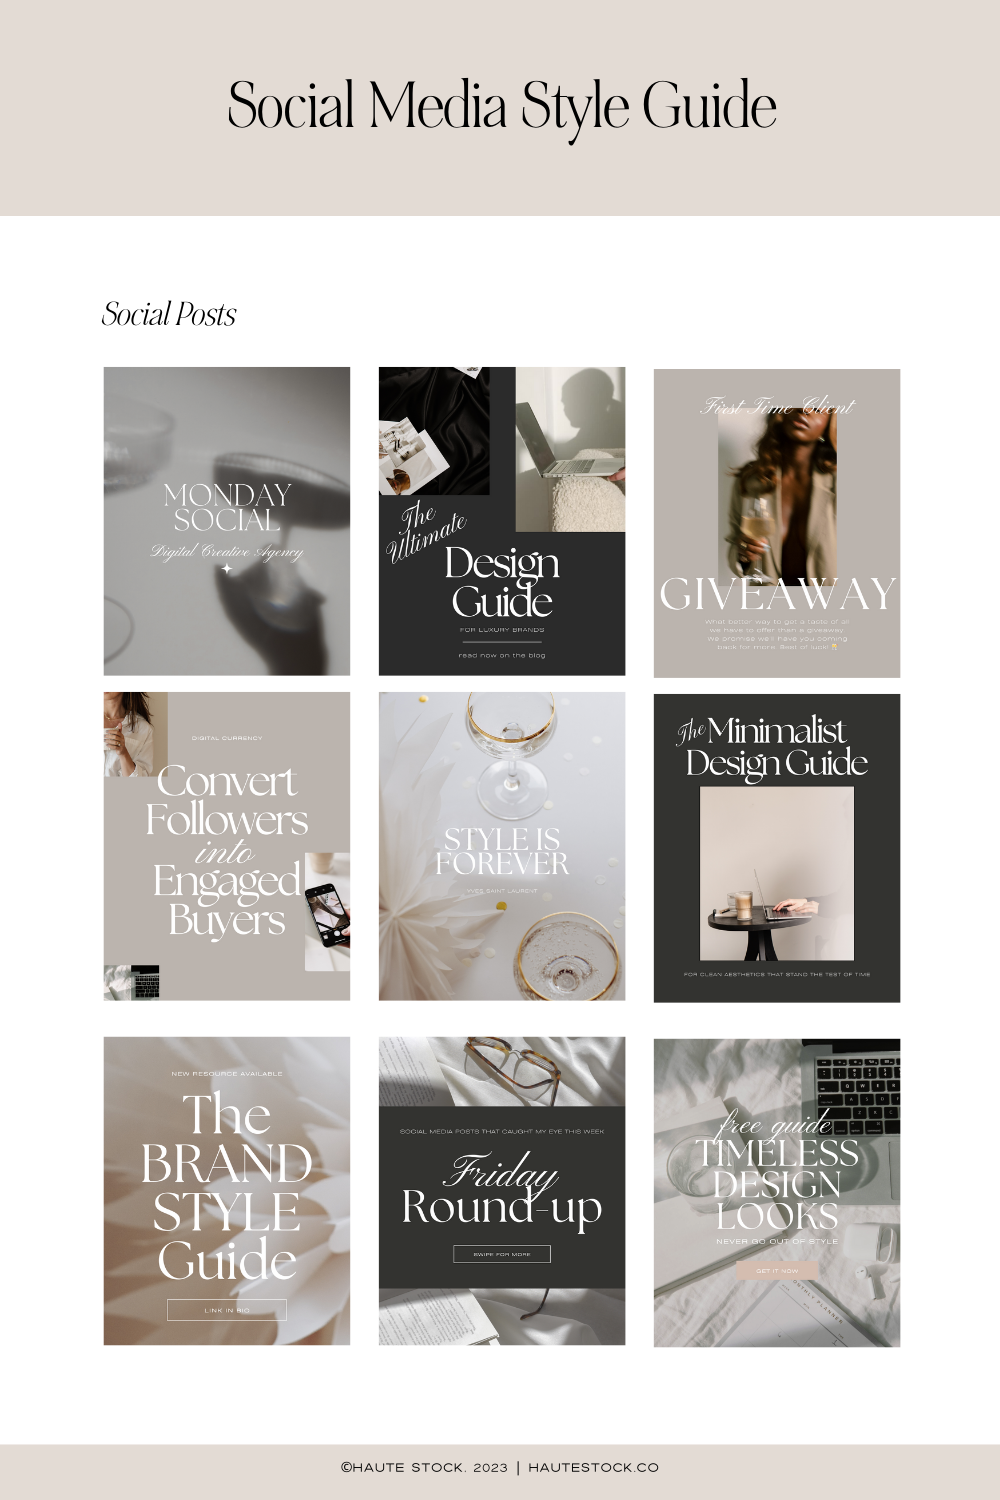 Style guide image featuring a brand's cohesive social templates.